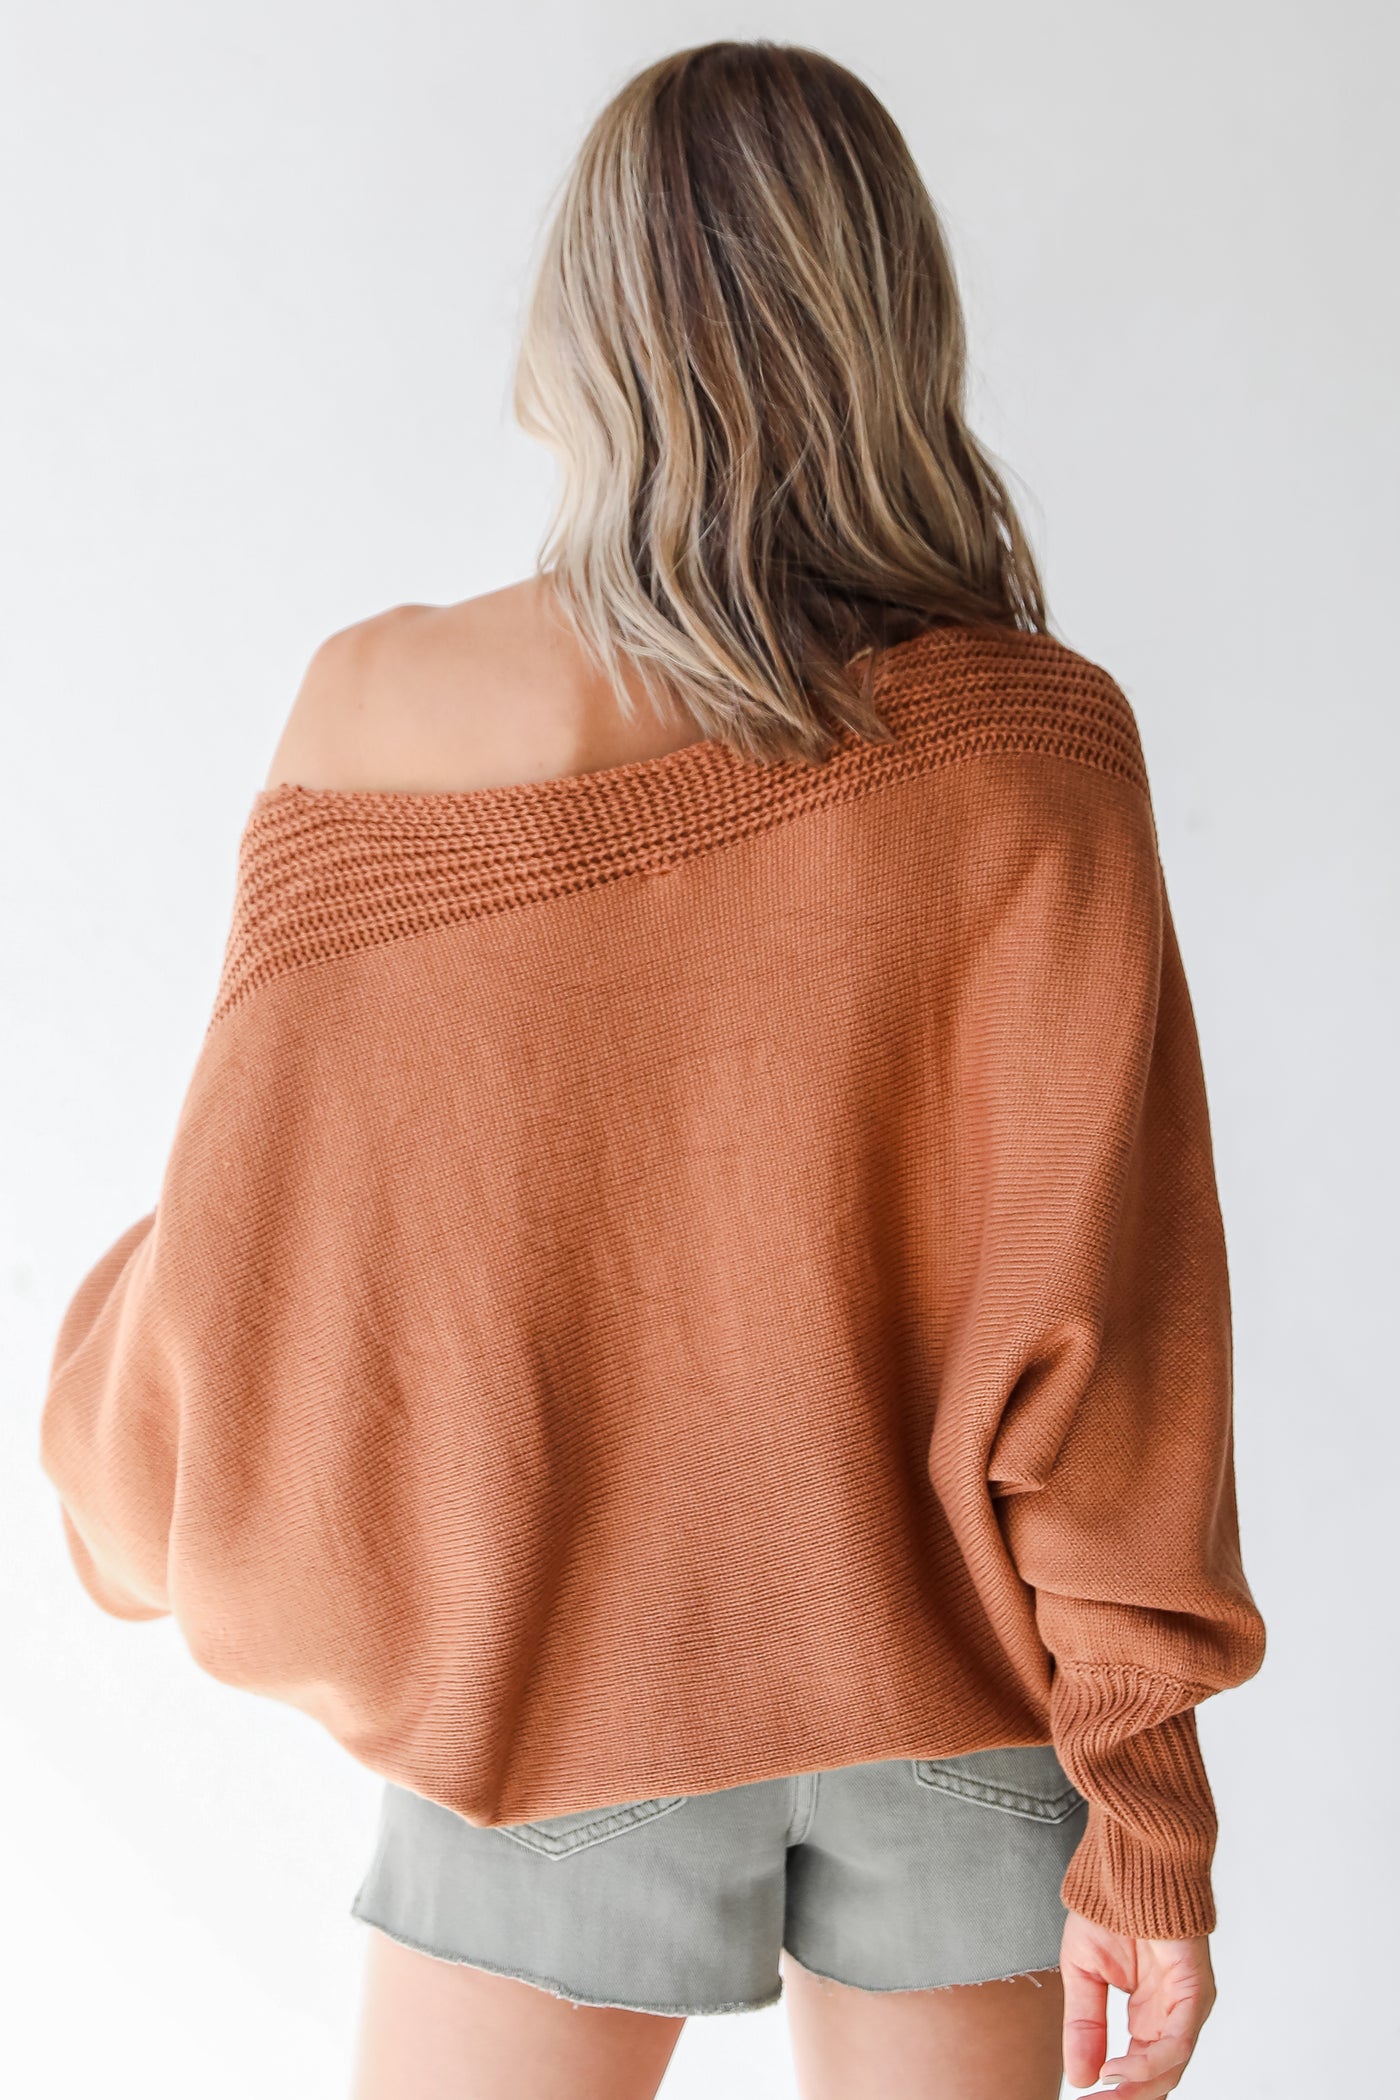 rust sweater back view